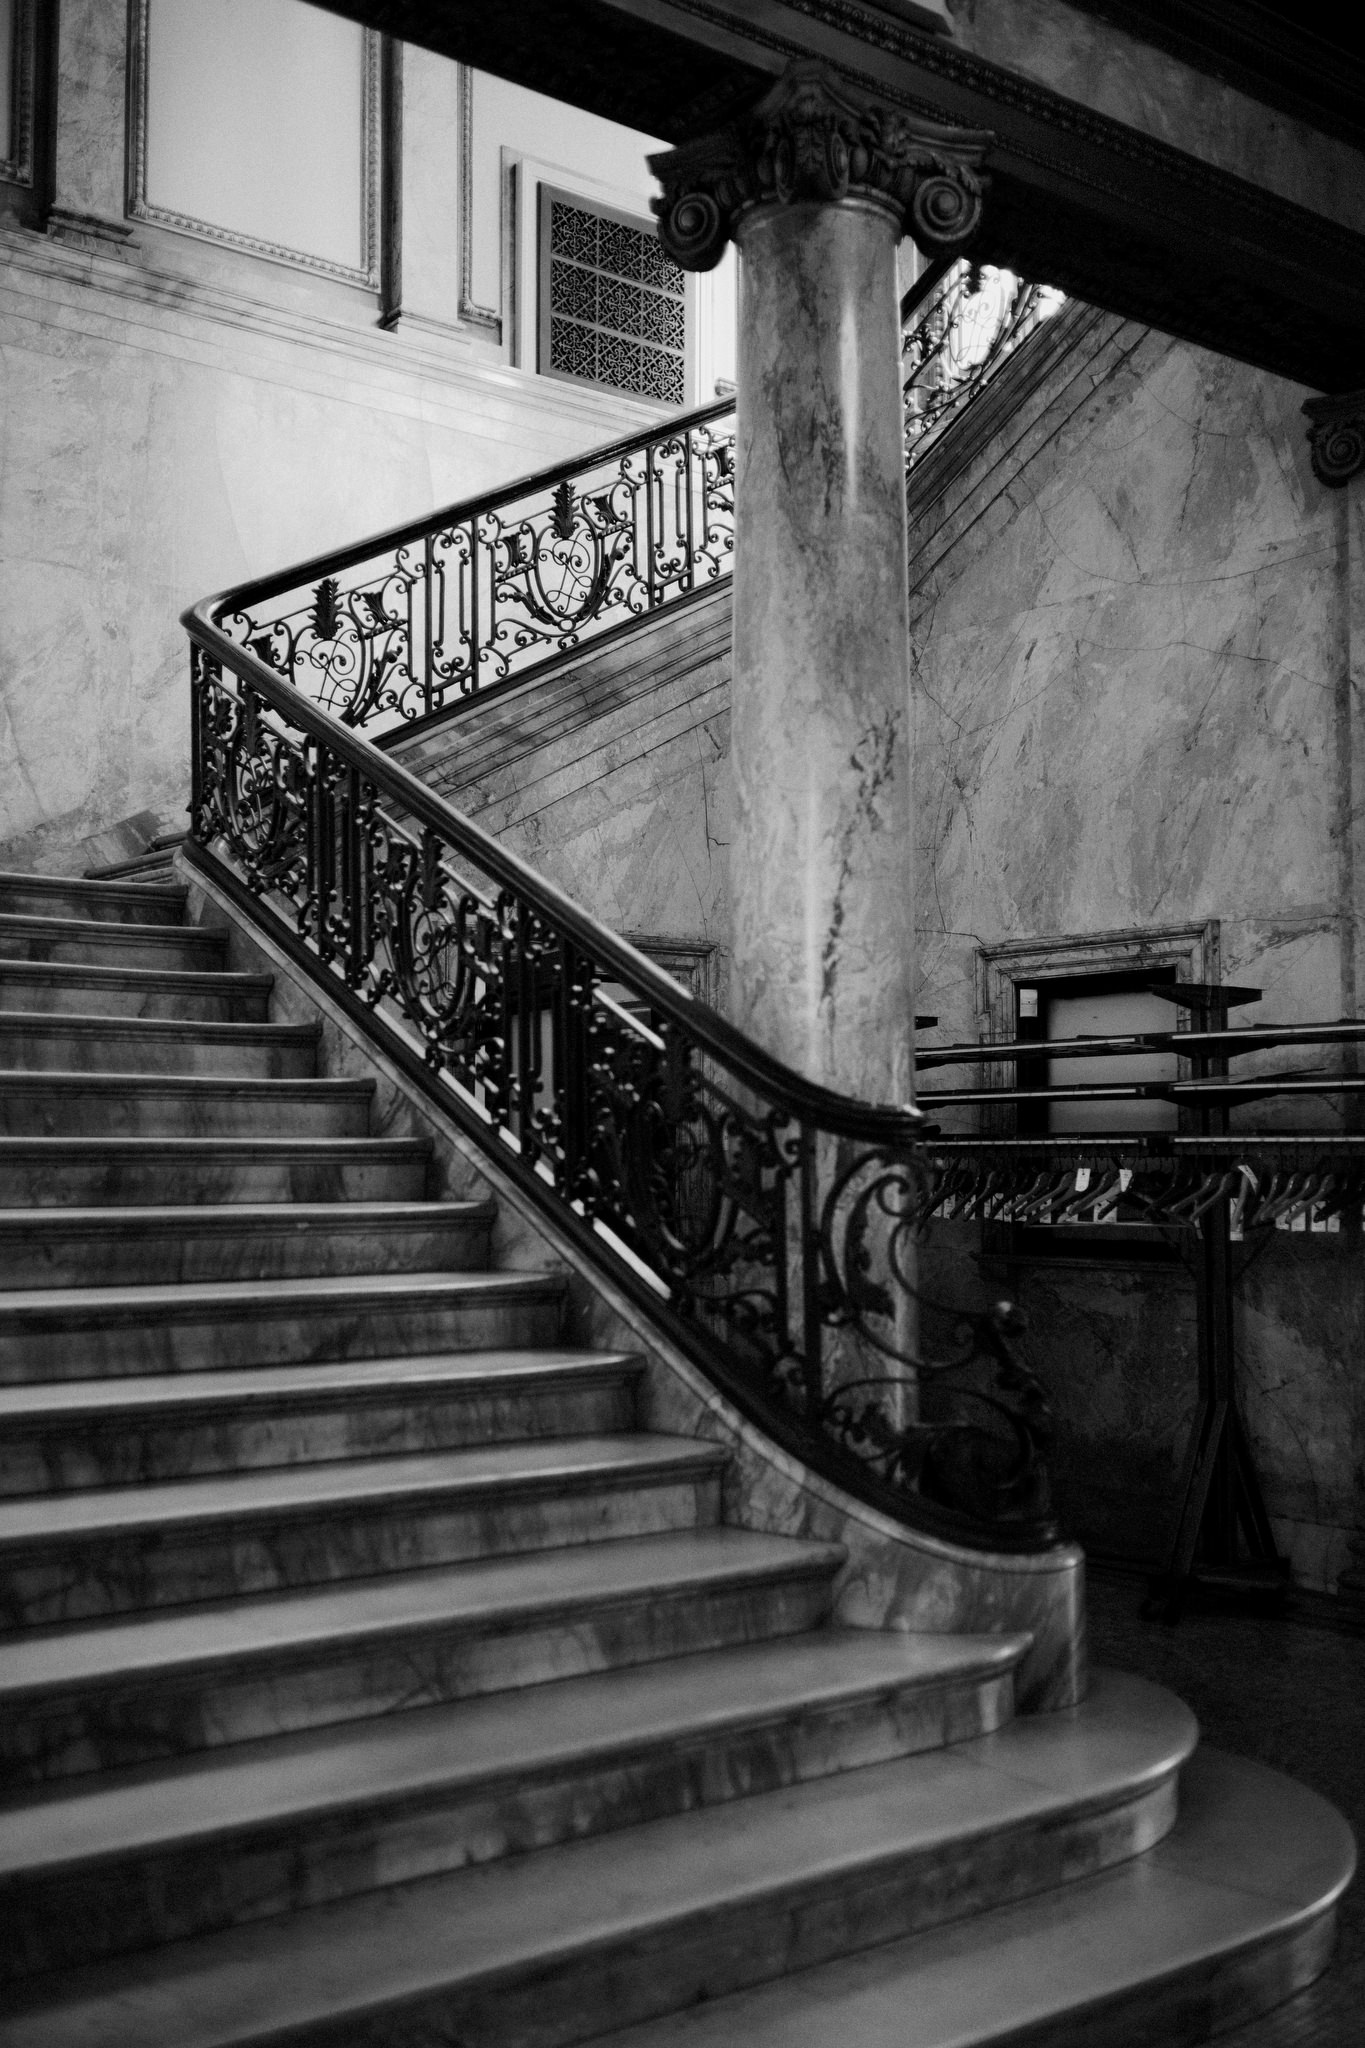 Grand staircase in the Providence Public Library, Rhode Island